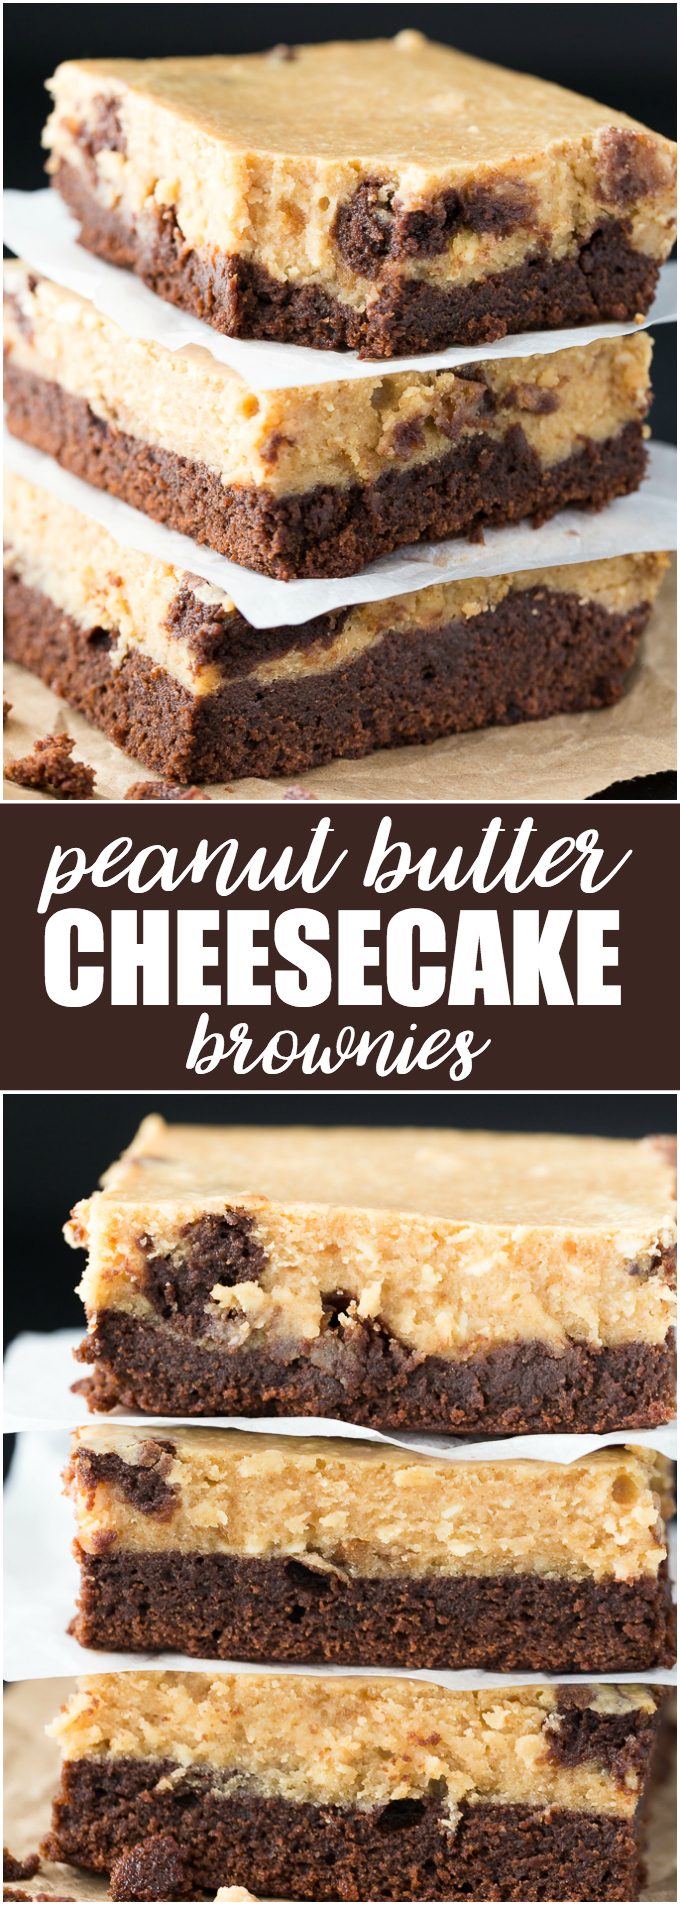 Peanut Butter Cheesecake Brownies - A rich fudgy brownie layer is topped by a smooth peanut butter cheesecake filling. This dessert tastes out of this world! 